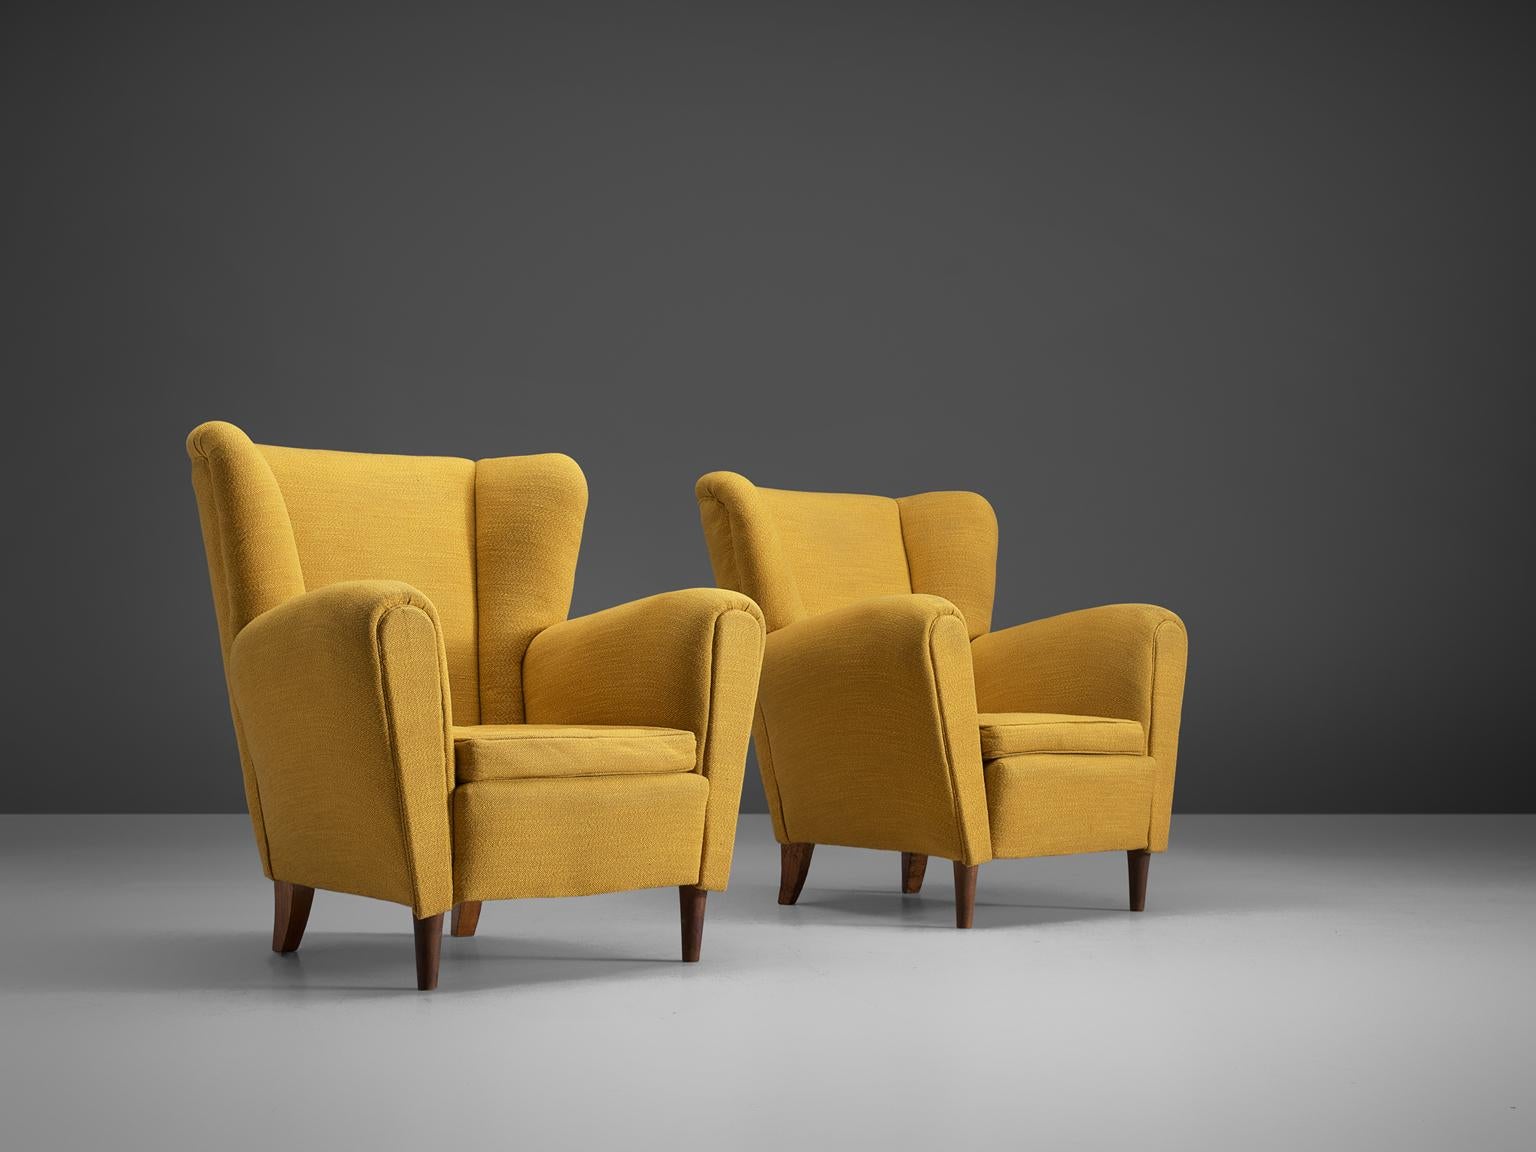 Set of armchairs, fabric, wood, Scandinavia, 1950s.

This set of lounge chairs is both voluptuous and grand as they are comfortable. The chairs have semi high wingbacks and feature yellow piping and small tapered wooden legs. Typical curvy, bold